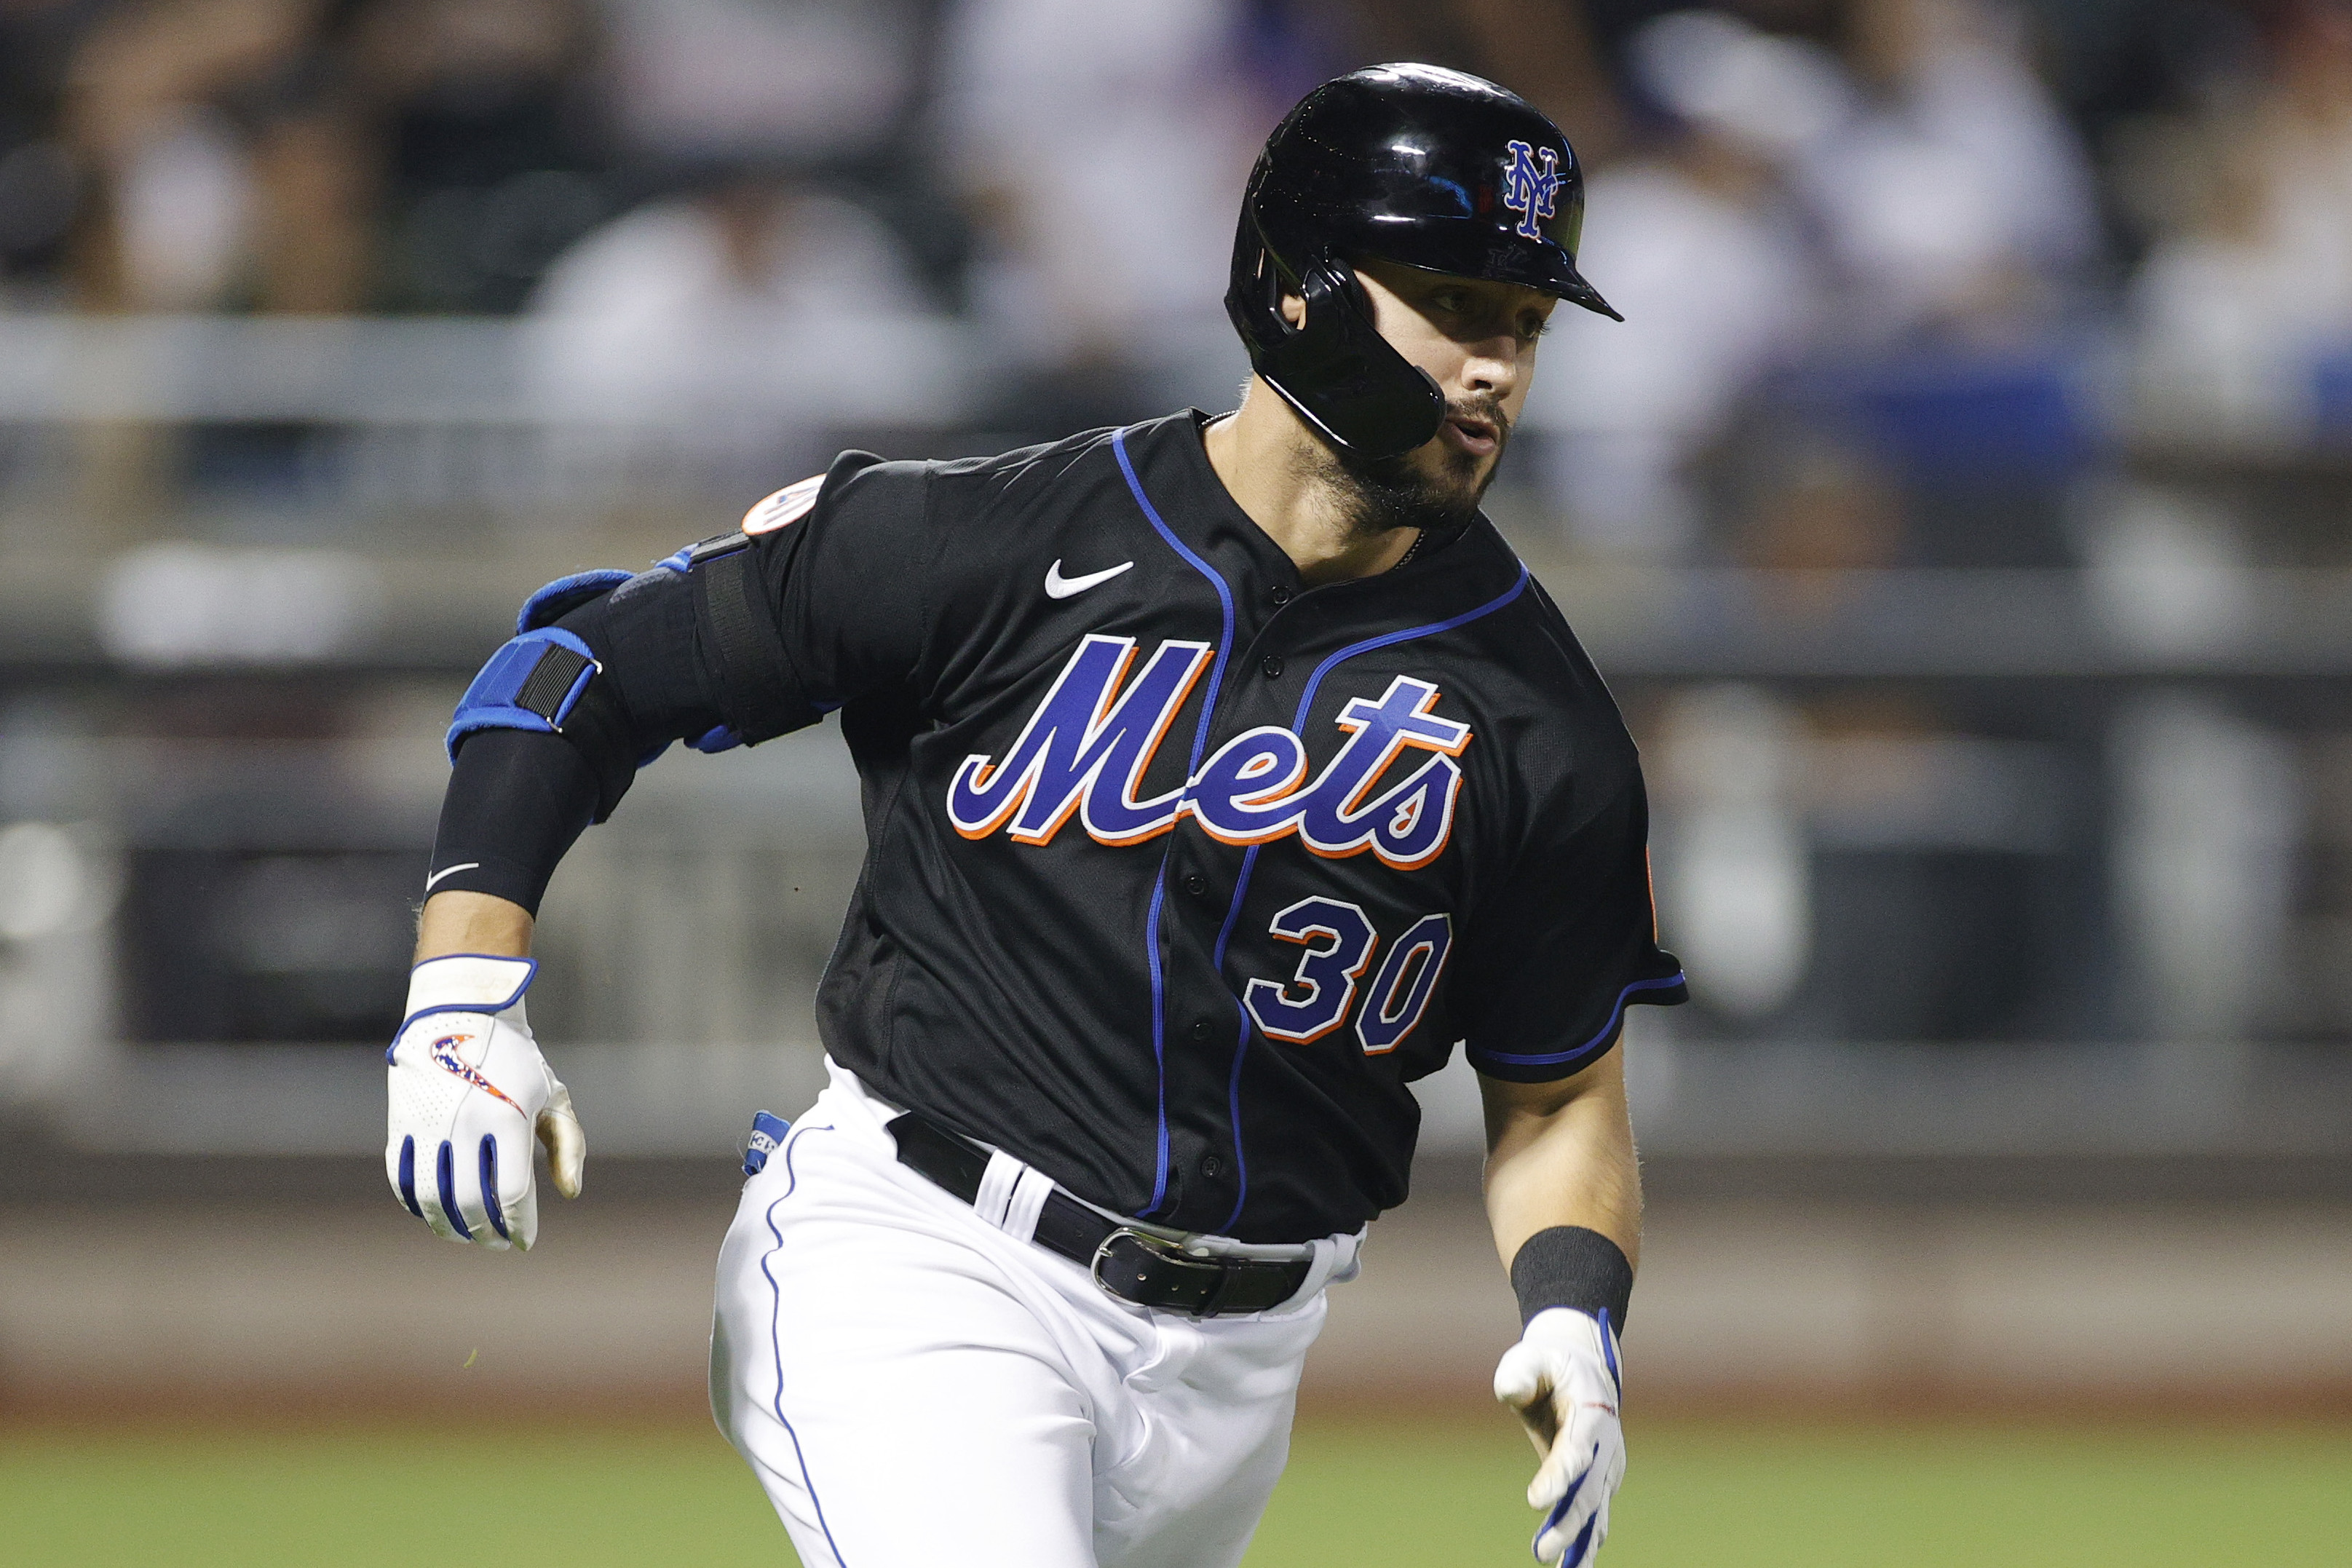 Report: Michael Conforto expected to opt out of SF Giants deal